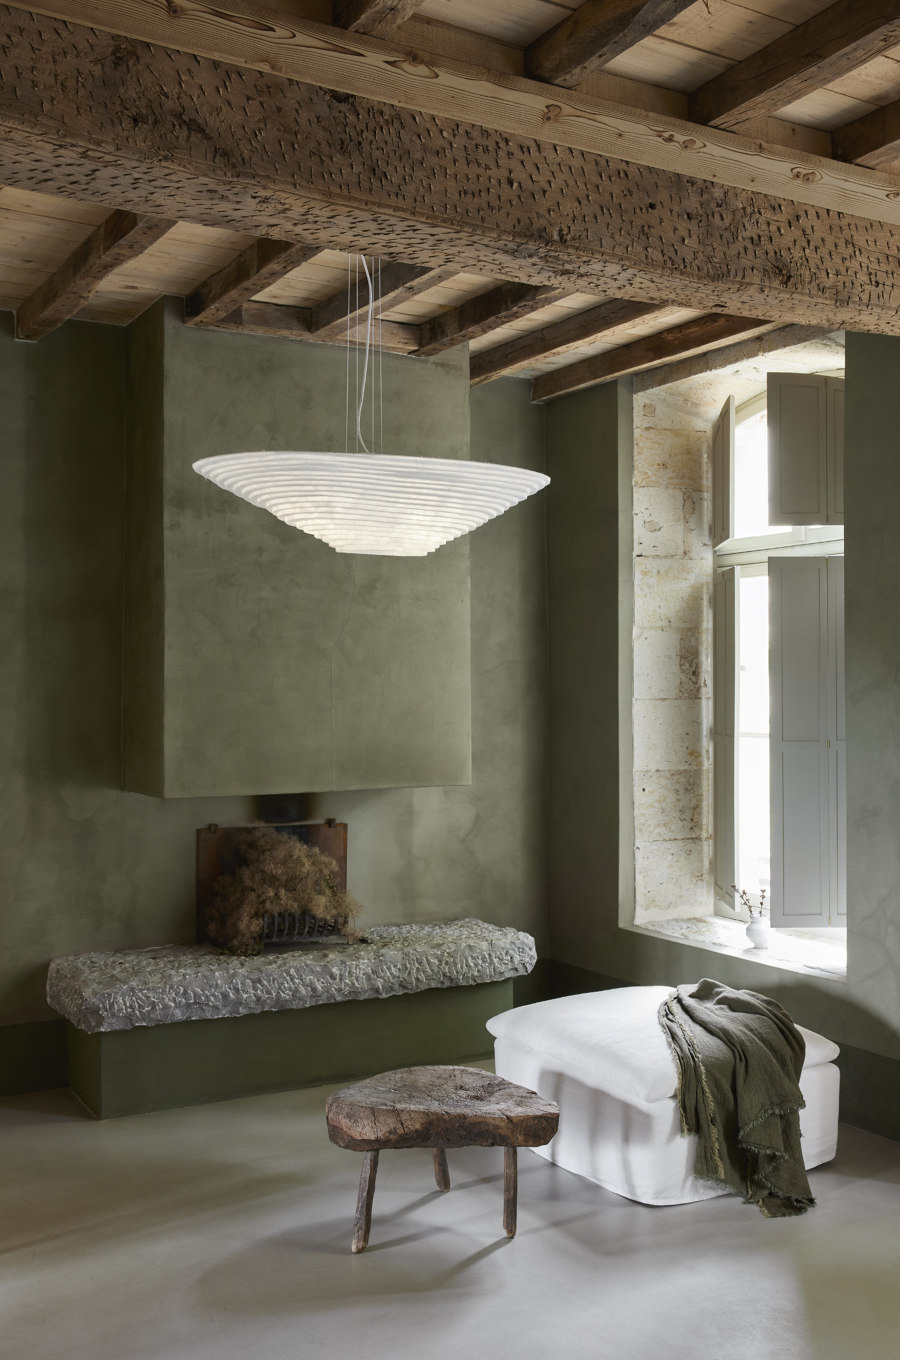 Nebulis by Forestier: new lighting from centuries-old materials | News